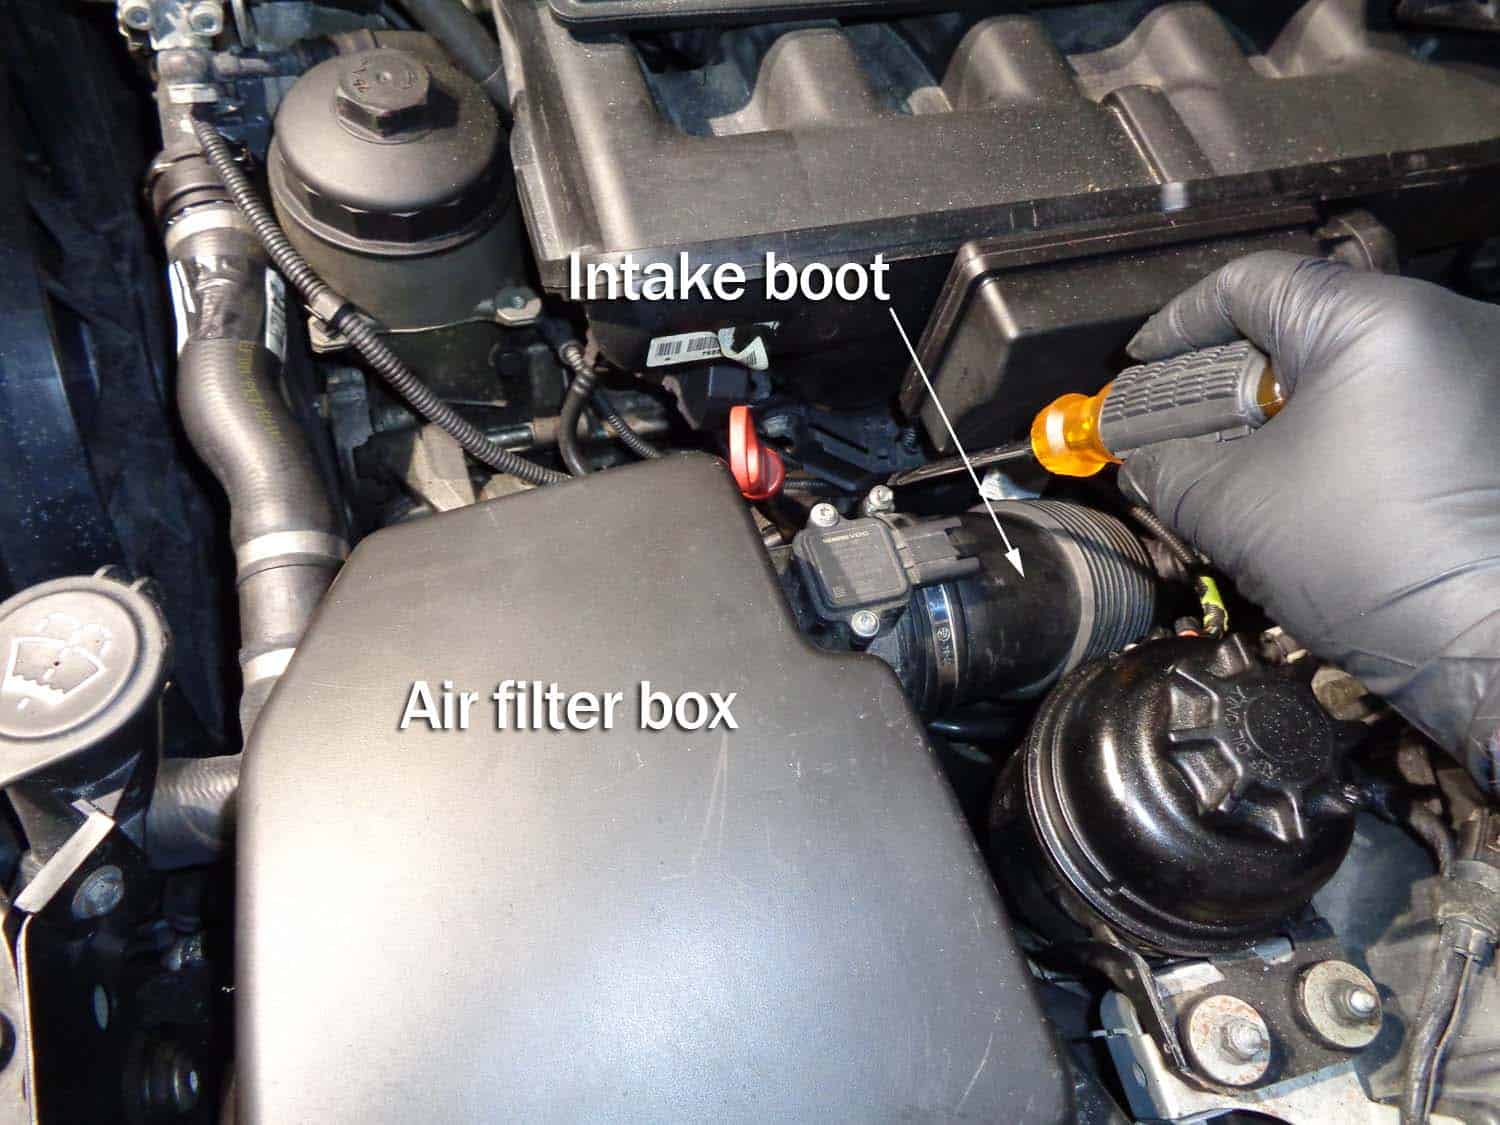 bmw e60 intake boot repair - loosen the hose clamp connecting boot to airbox